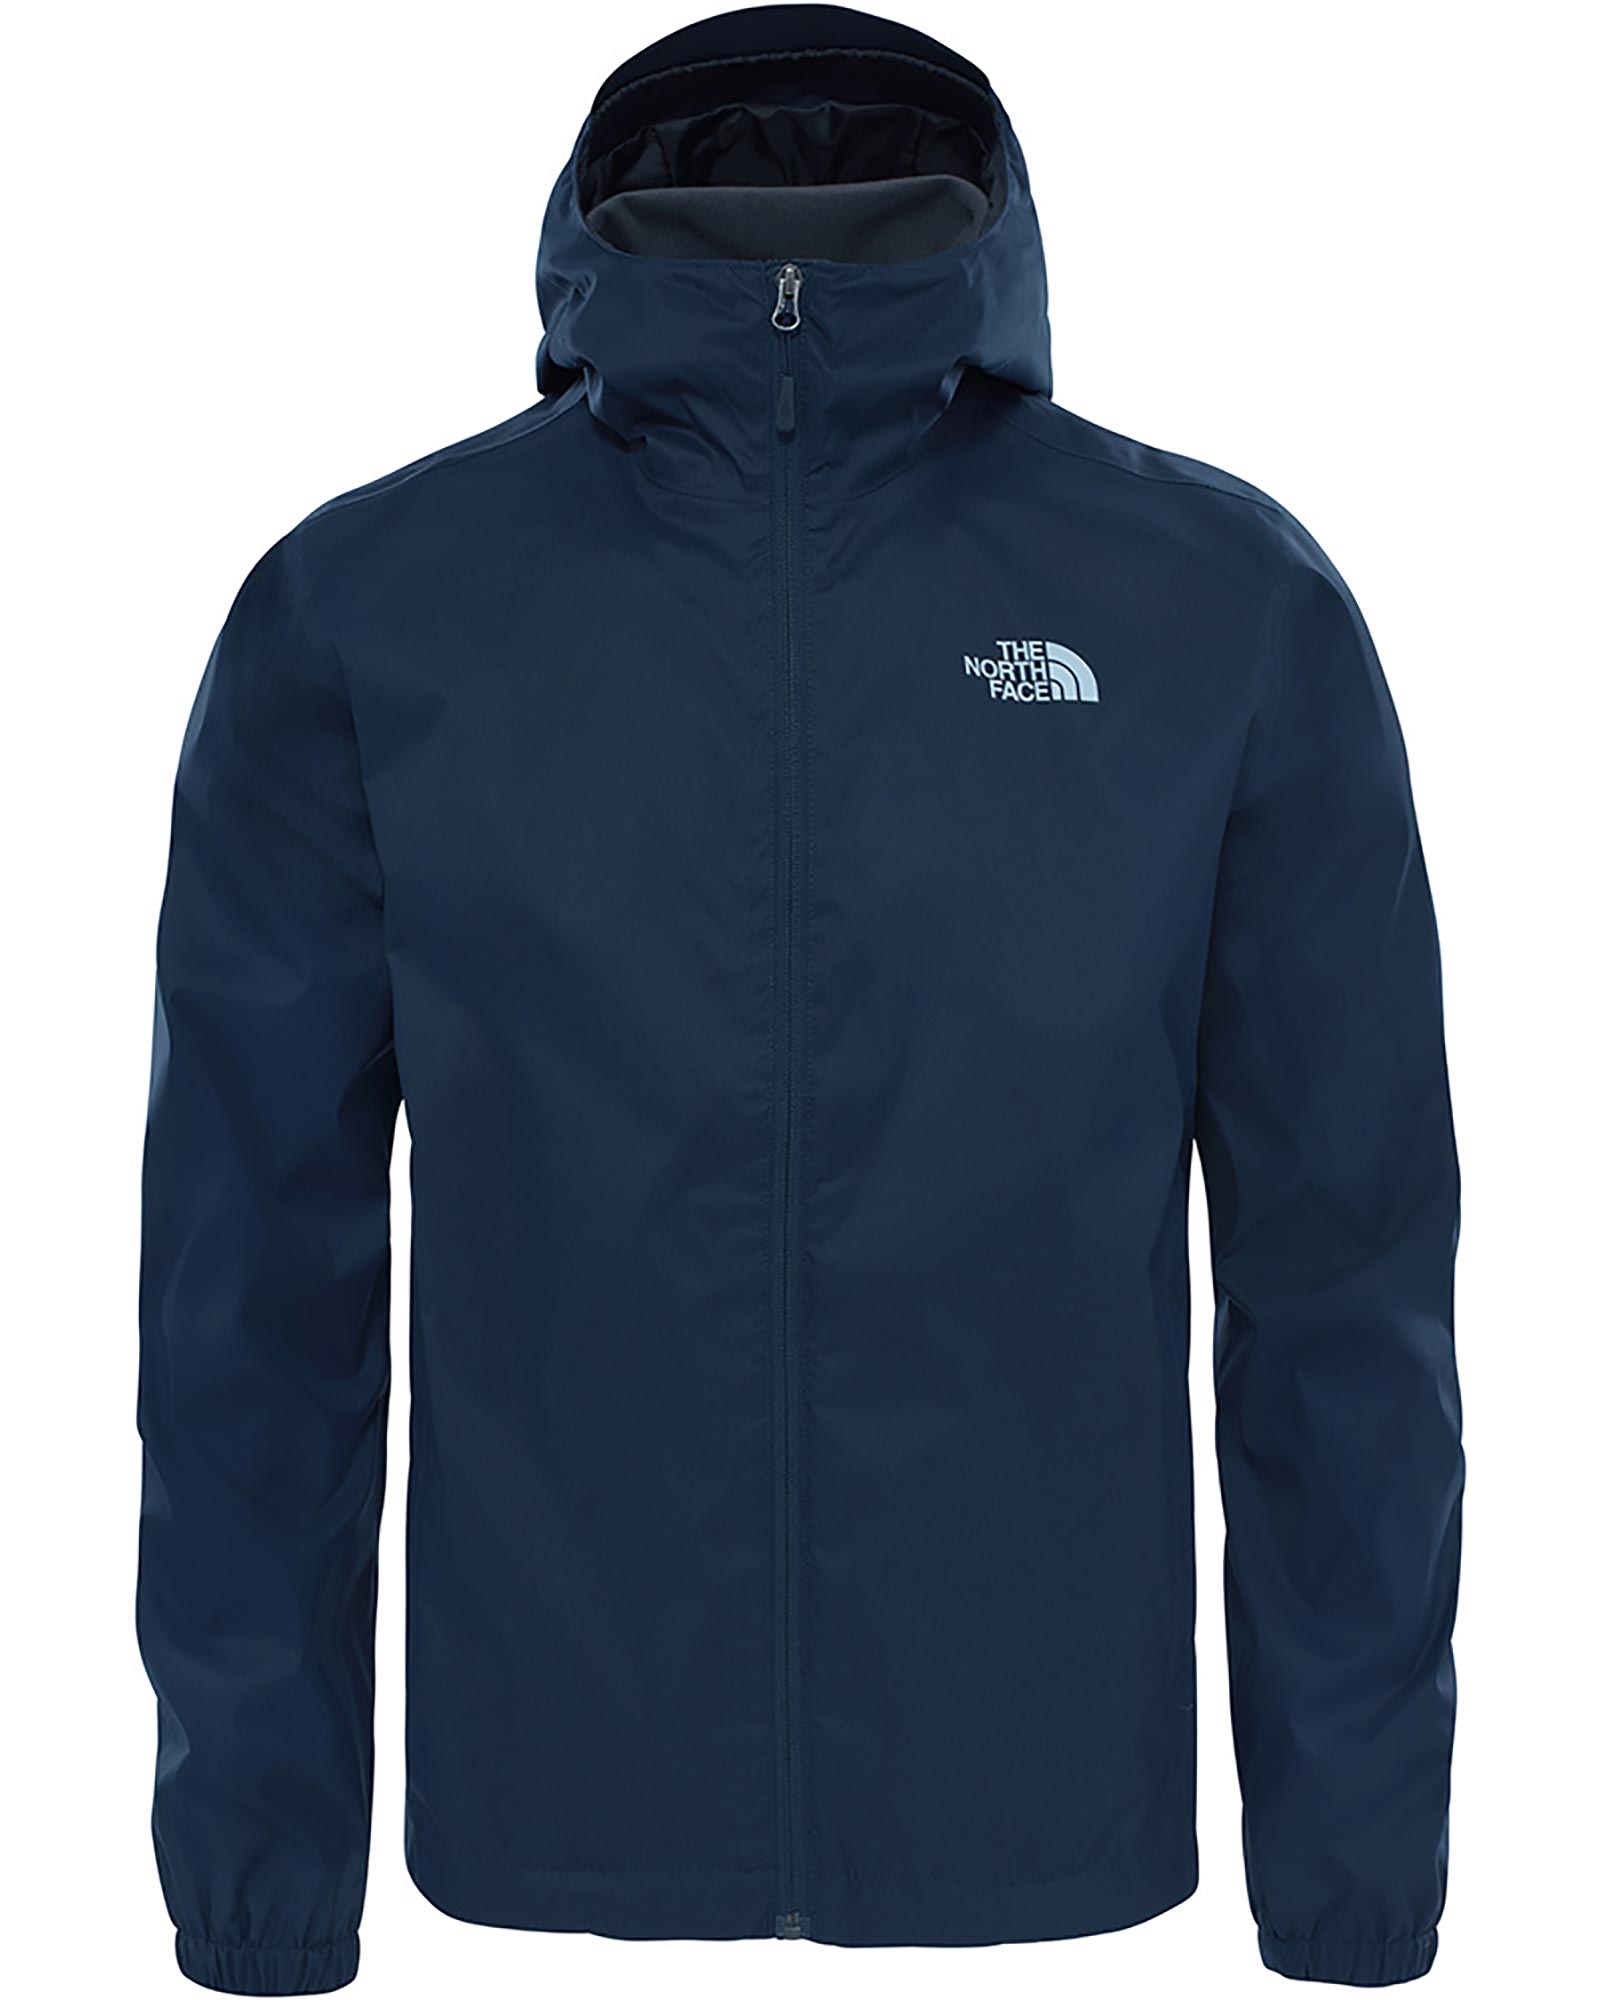 The North Face Quest DryVent Men’s Jacket - Navy XS